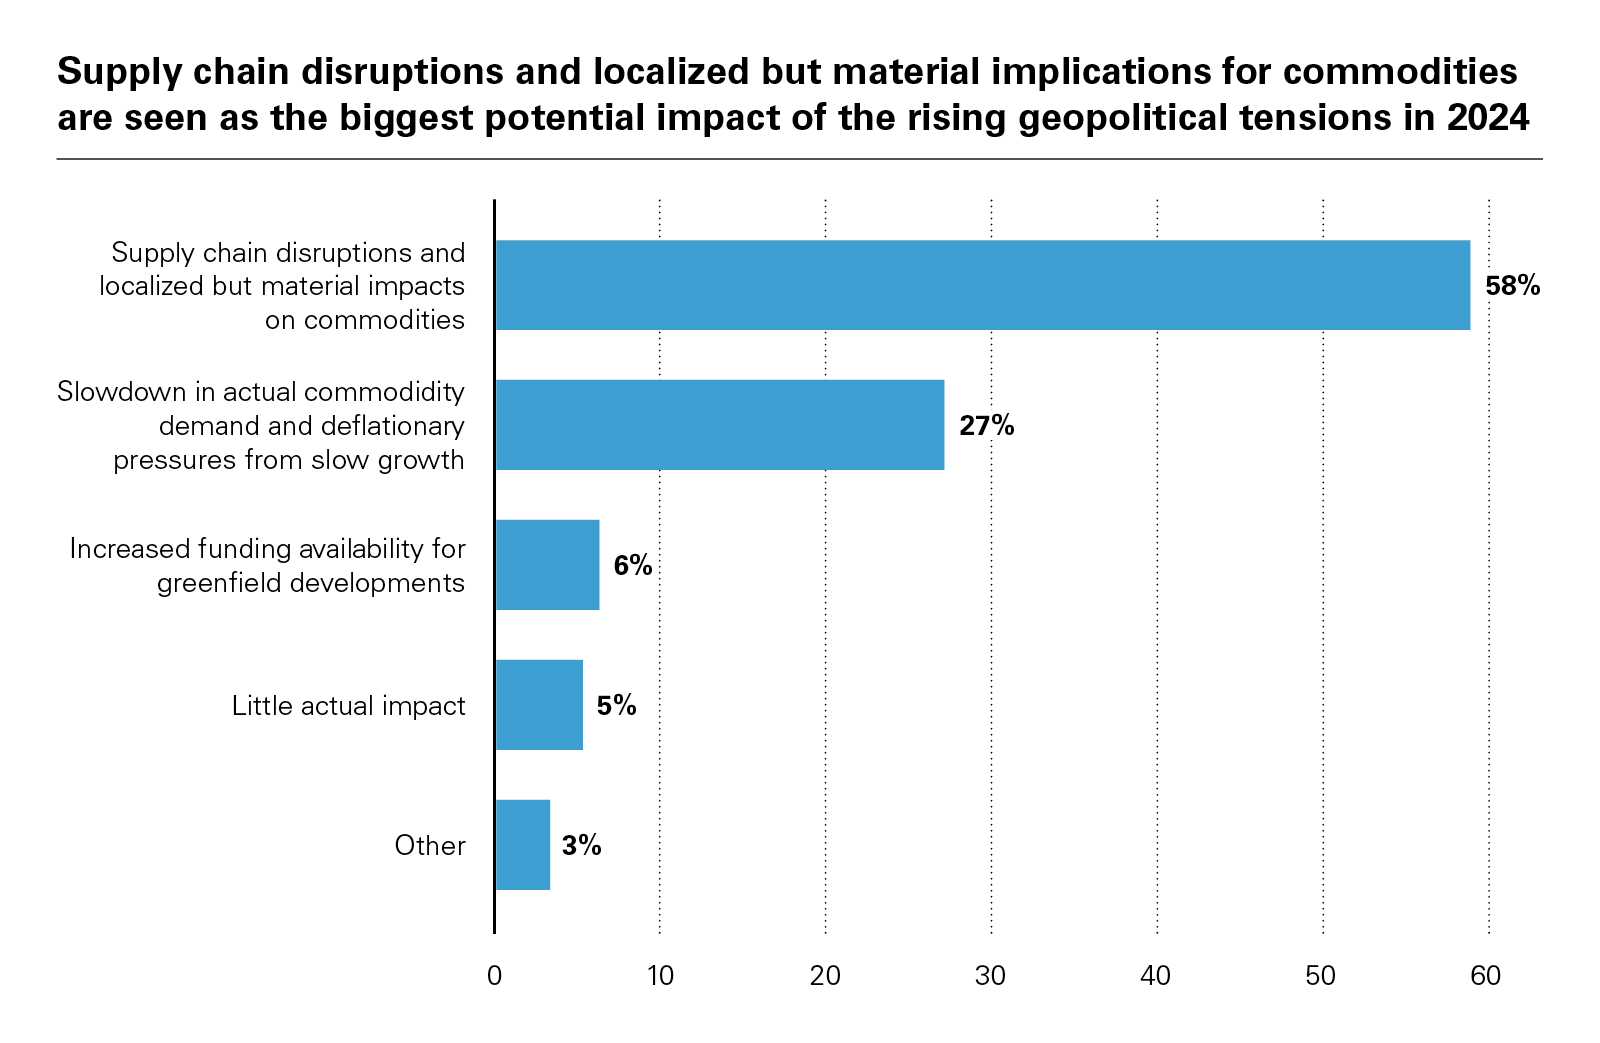 Supply chain disruptions and localized but material implications for commodities are seen as the biggest potential impact of the rising geopolitical tensions in 2024